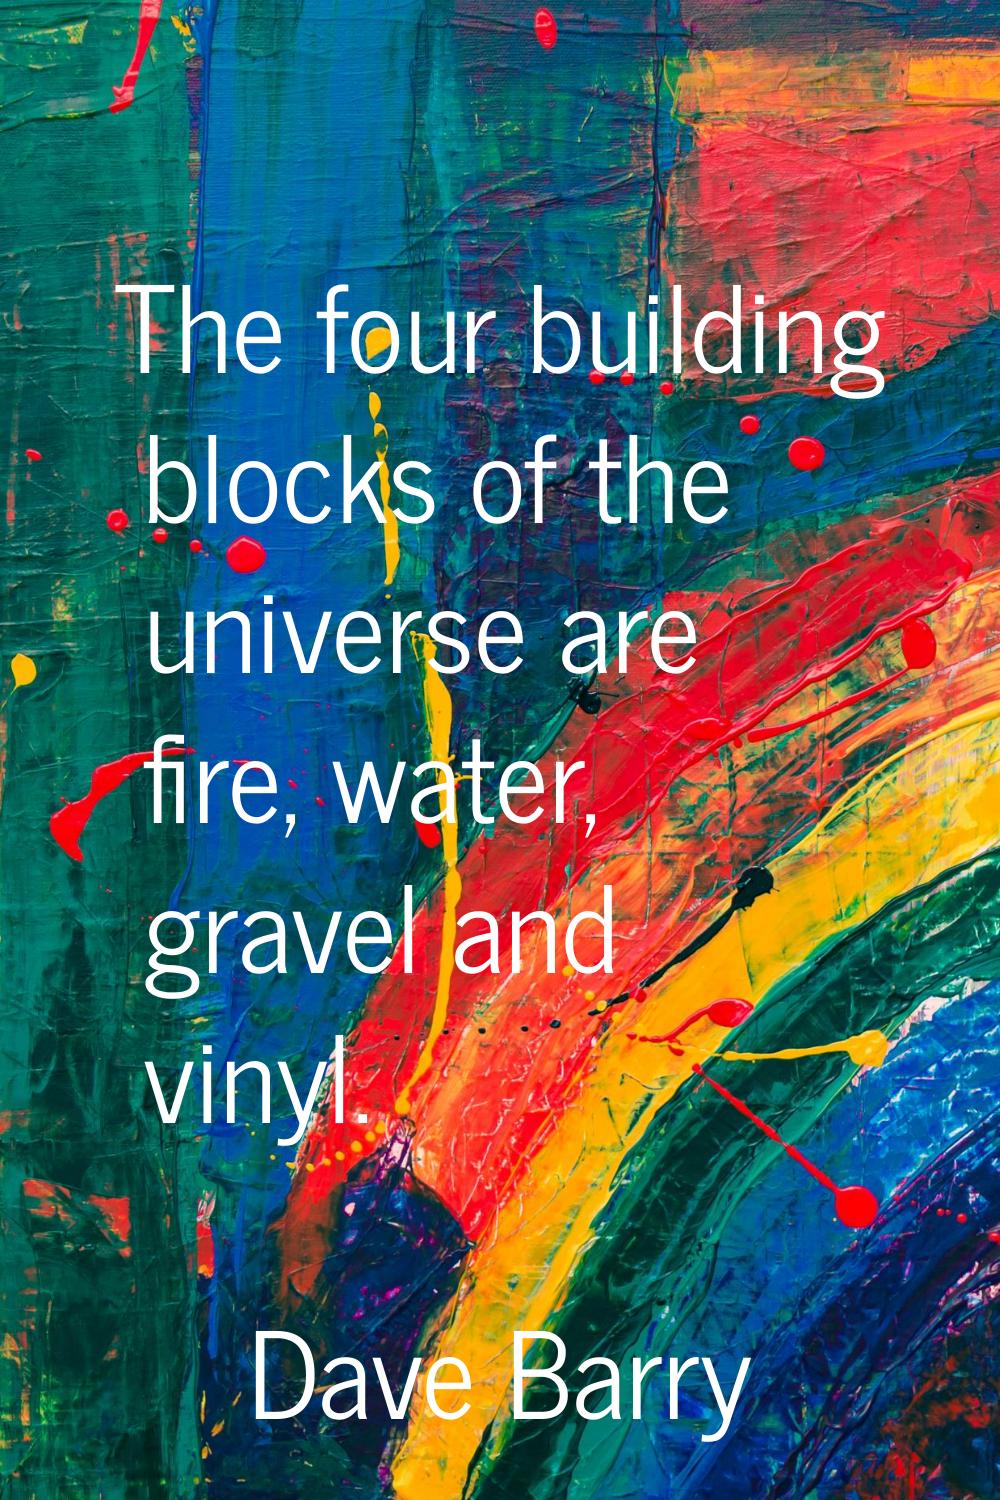 The four building blocks of the universe are fire, water, gravel and vinyl.